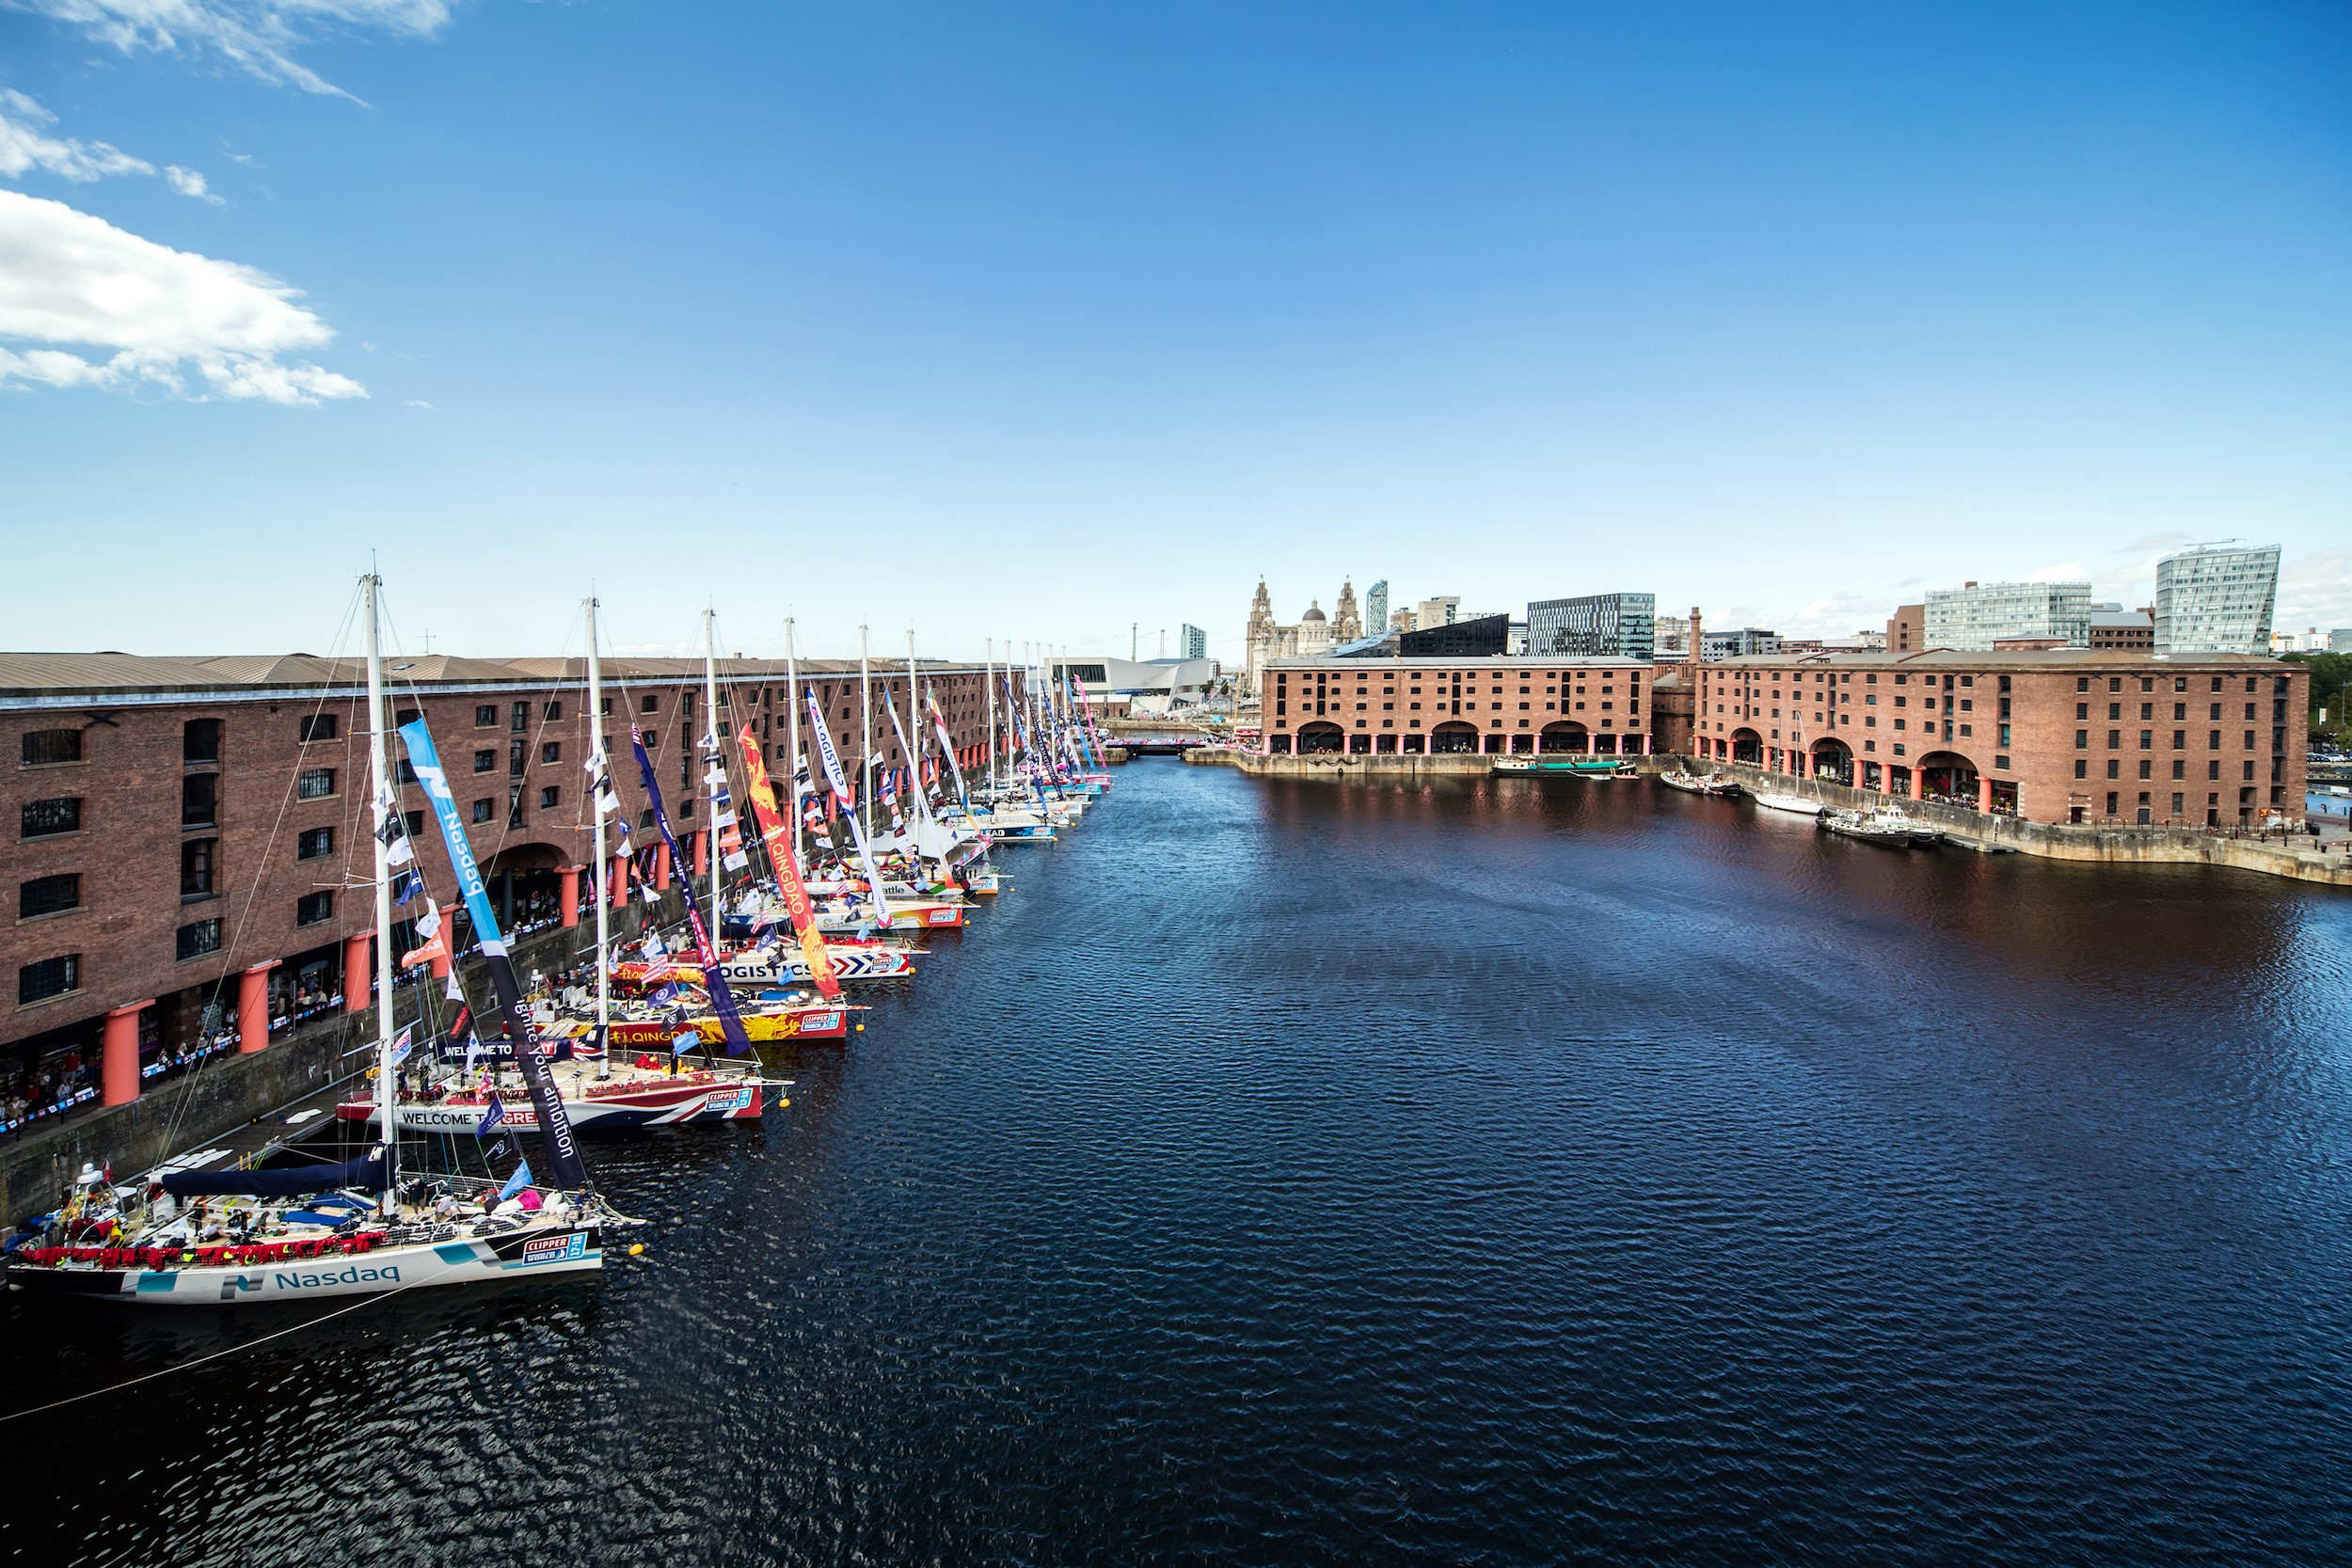 Historic moment as Albert Dock Liverpool receives Royal approval